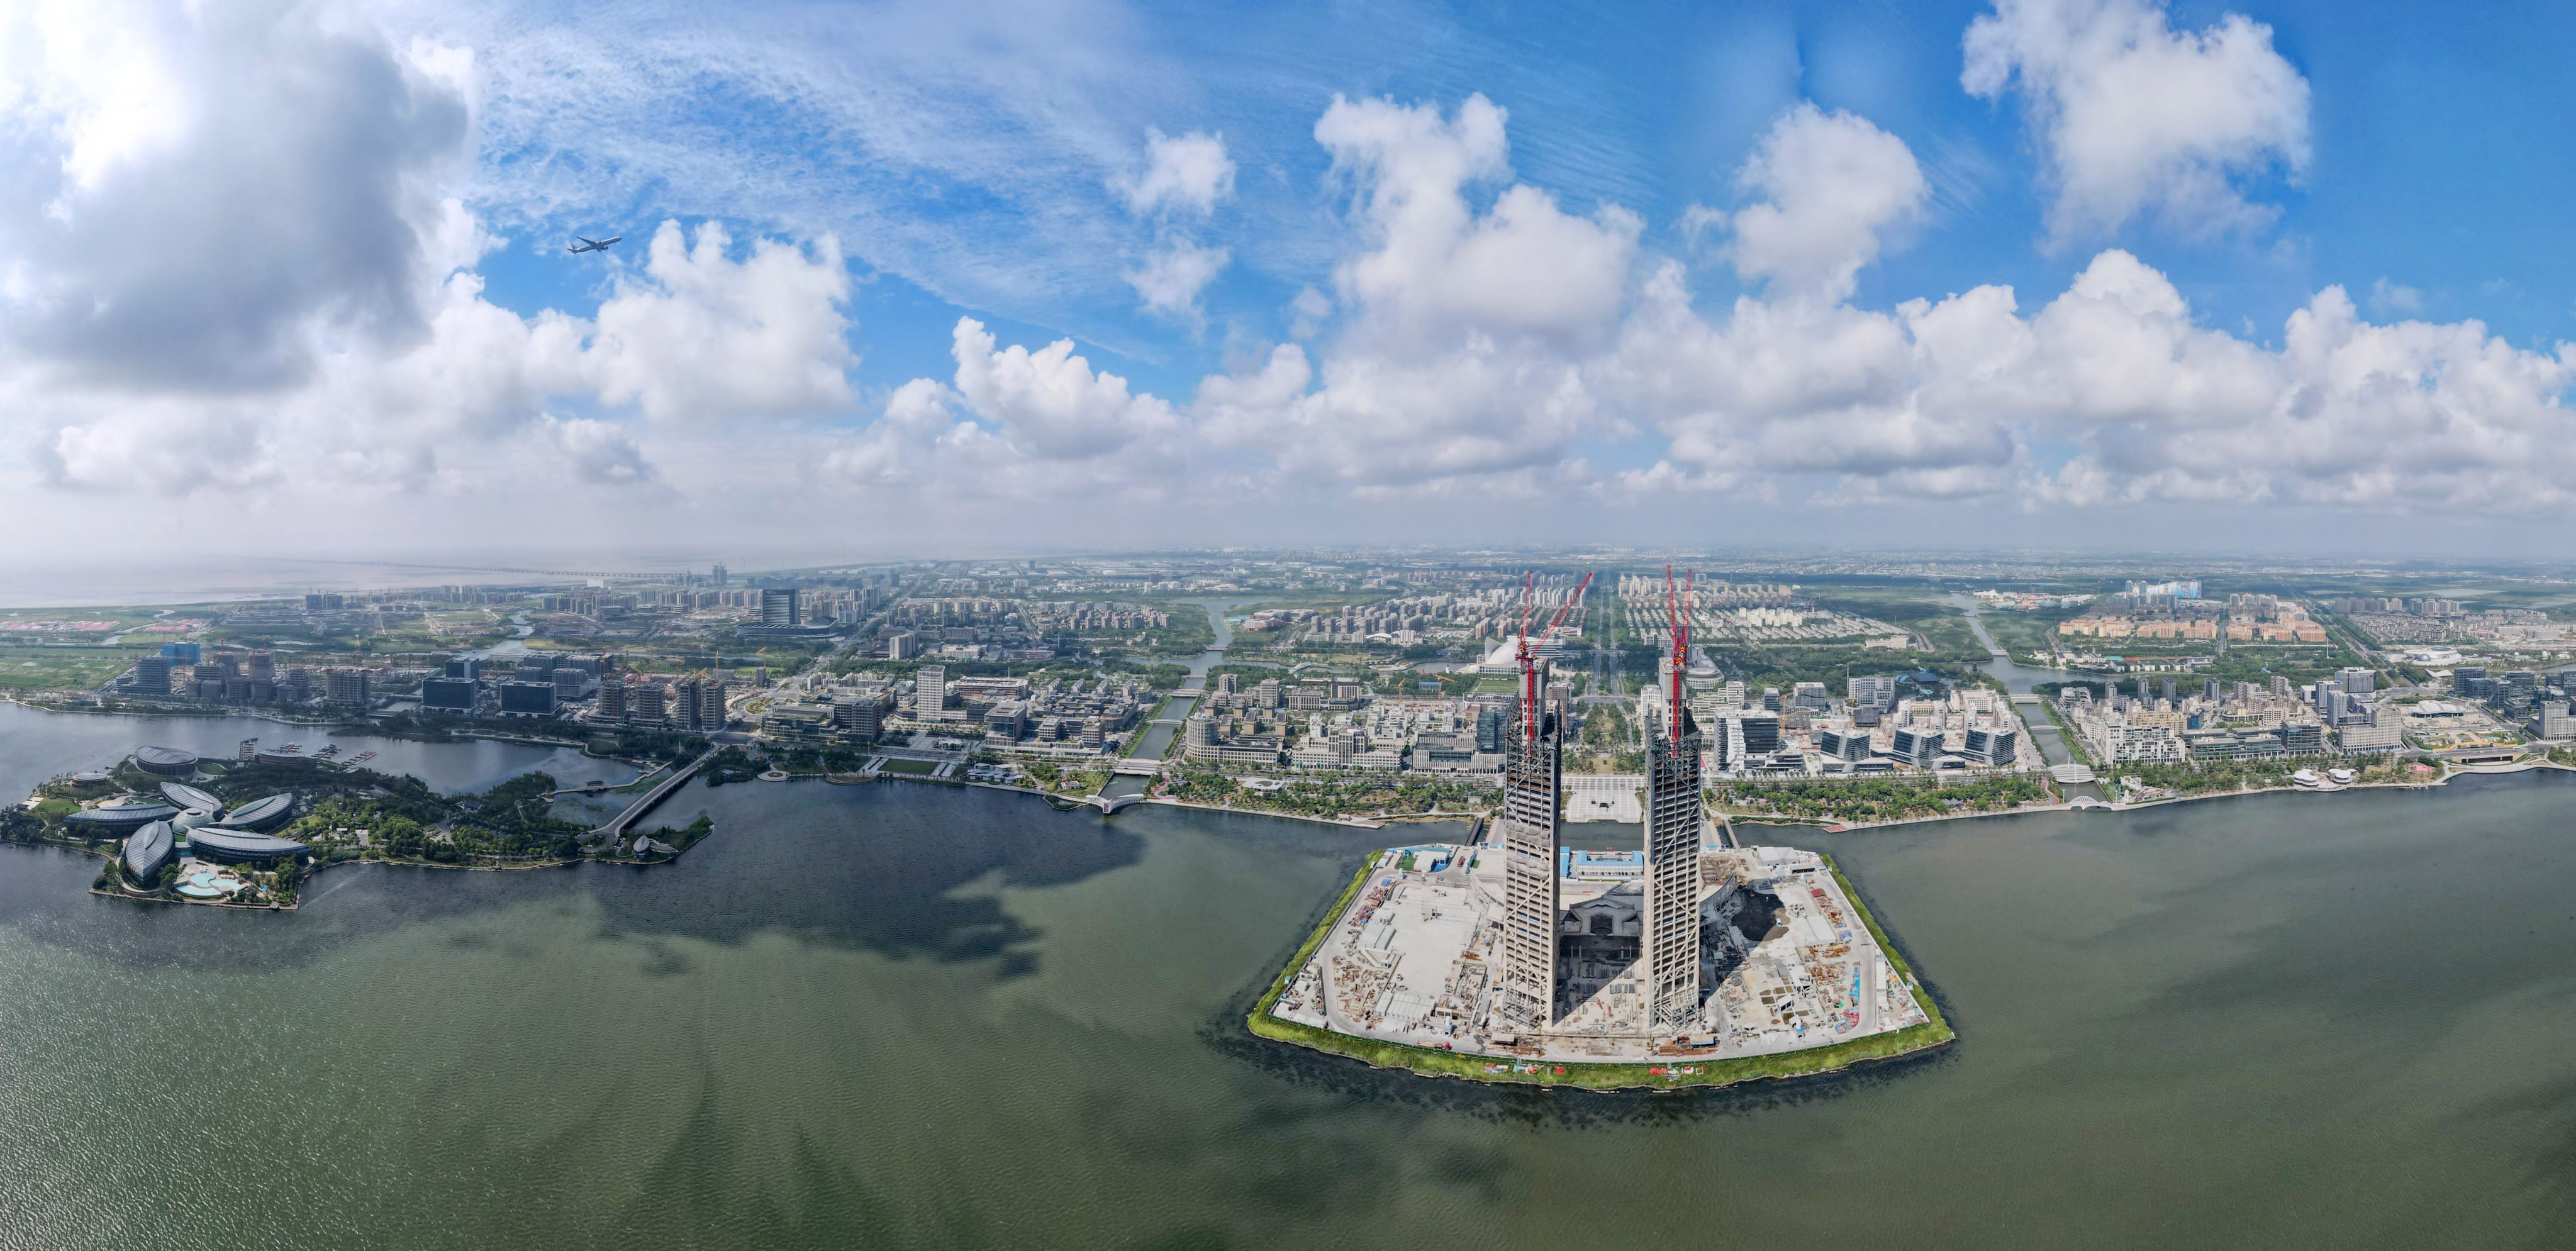 The Lingang free trade zone in Shanghai. The zone will be developed into a ‘demonstration area to promote the nation’s economic reforms’, the State Council’s guide says. Photo: Xinhua